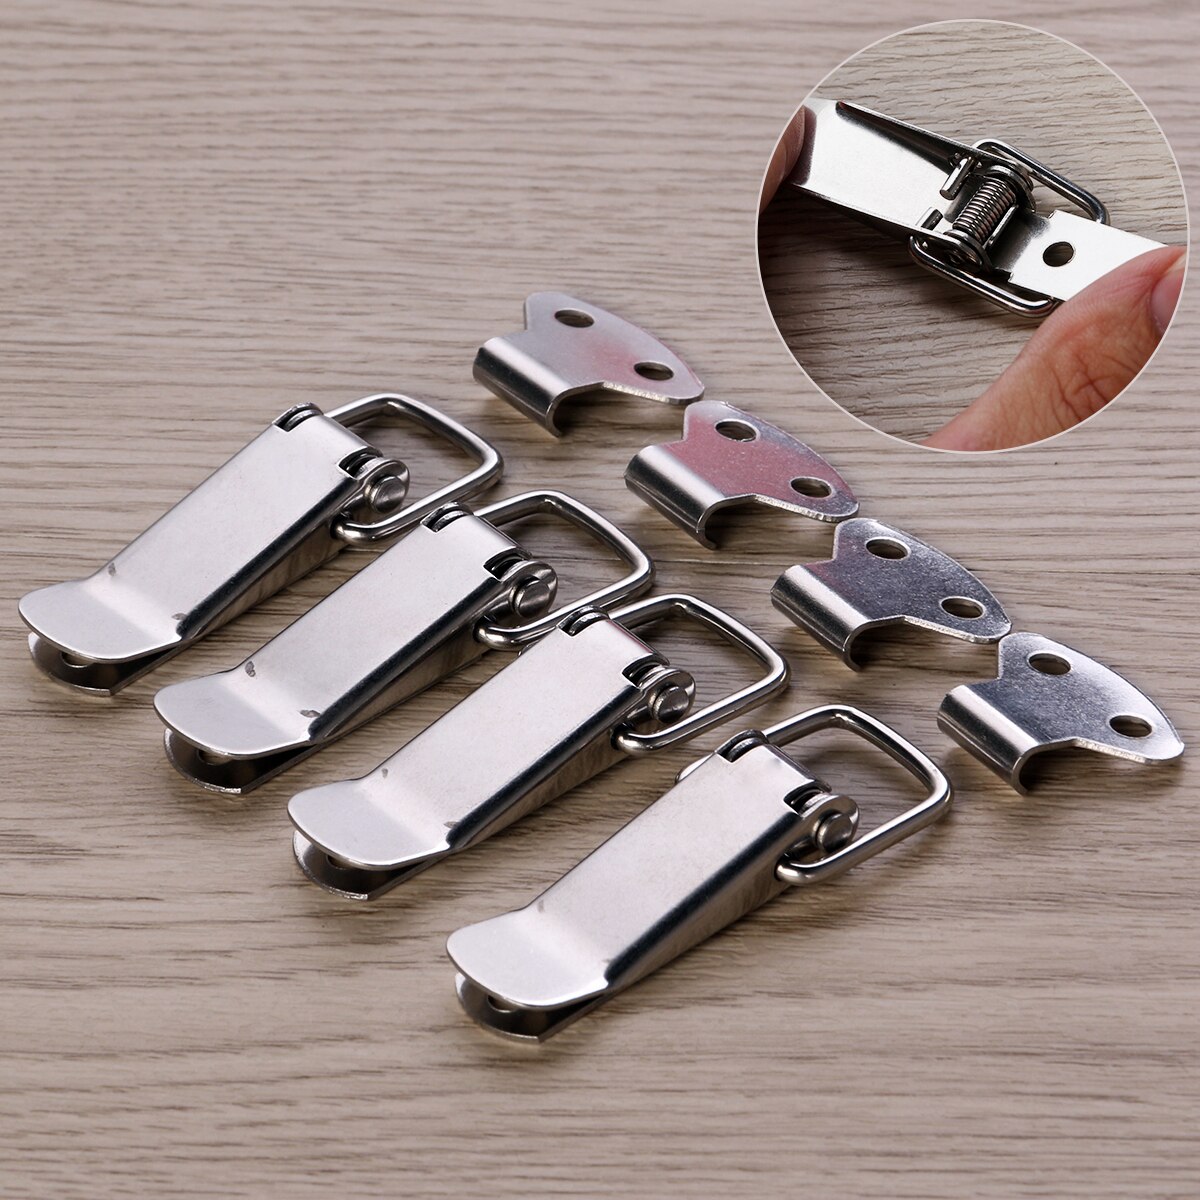 4pcs Stainless Steel Spring Loaded Toggle Case Box Chest Trunk Catches Hasps Clamps (Silver)